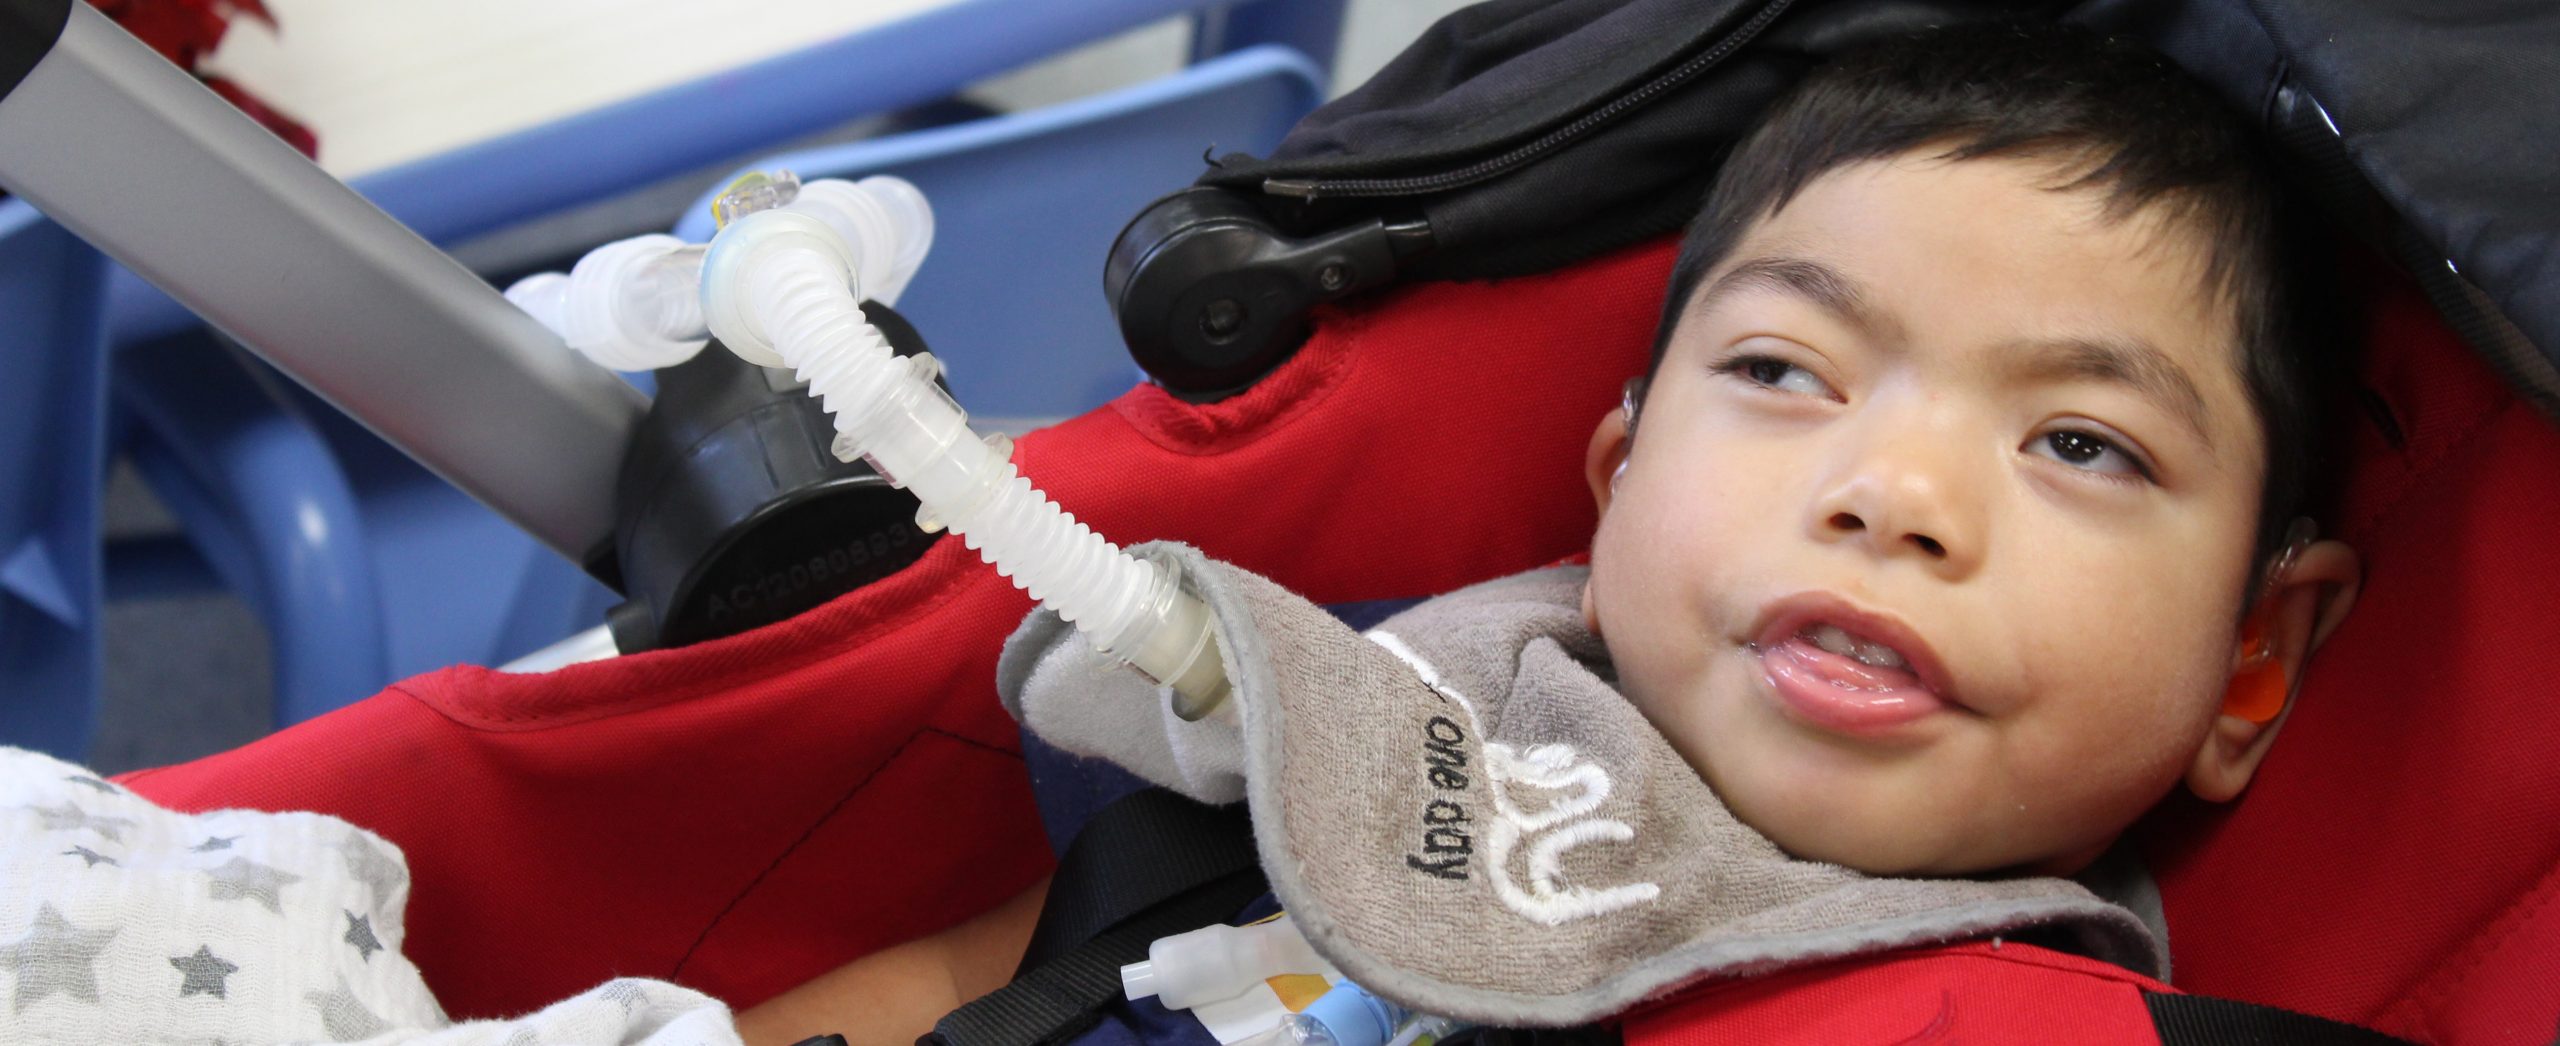 A young boy with a tracheostomy tube sits back in his stroller